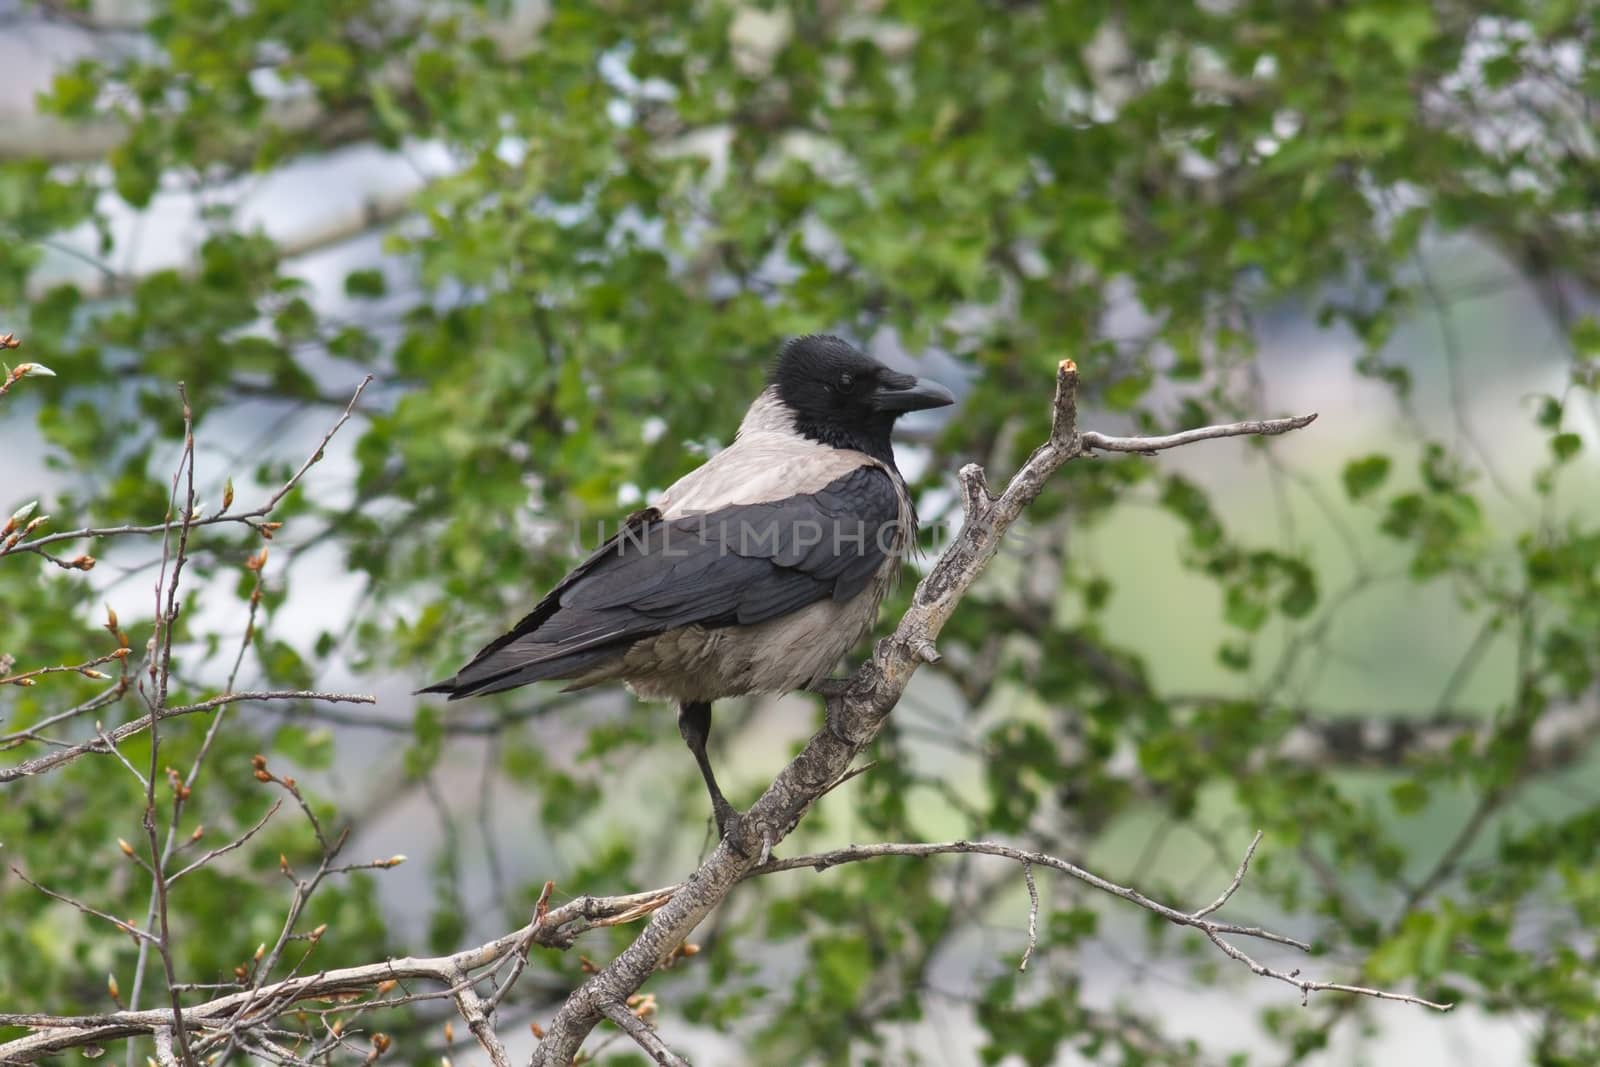 gray crow sitting on a branch among green leaves